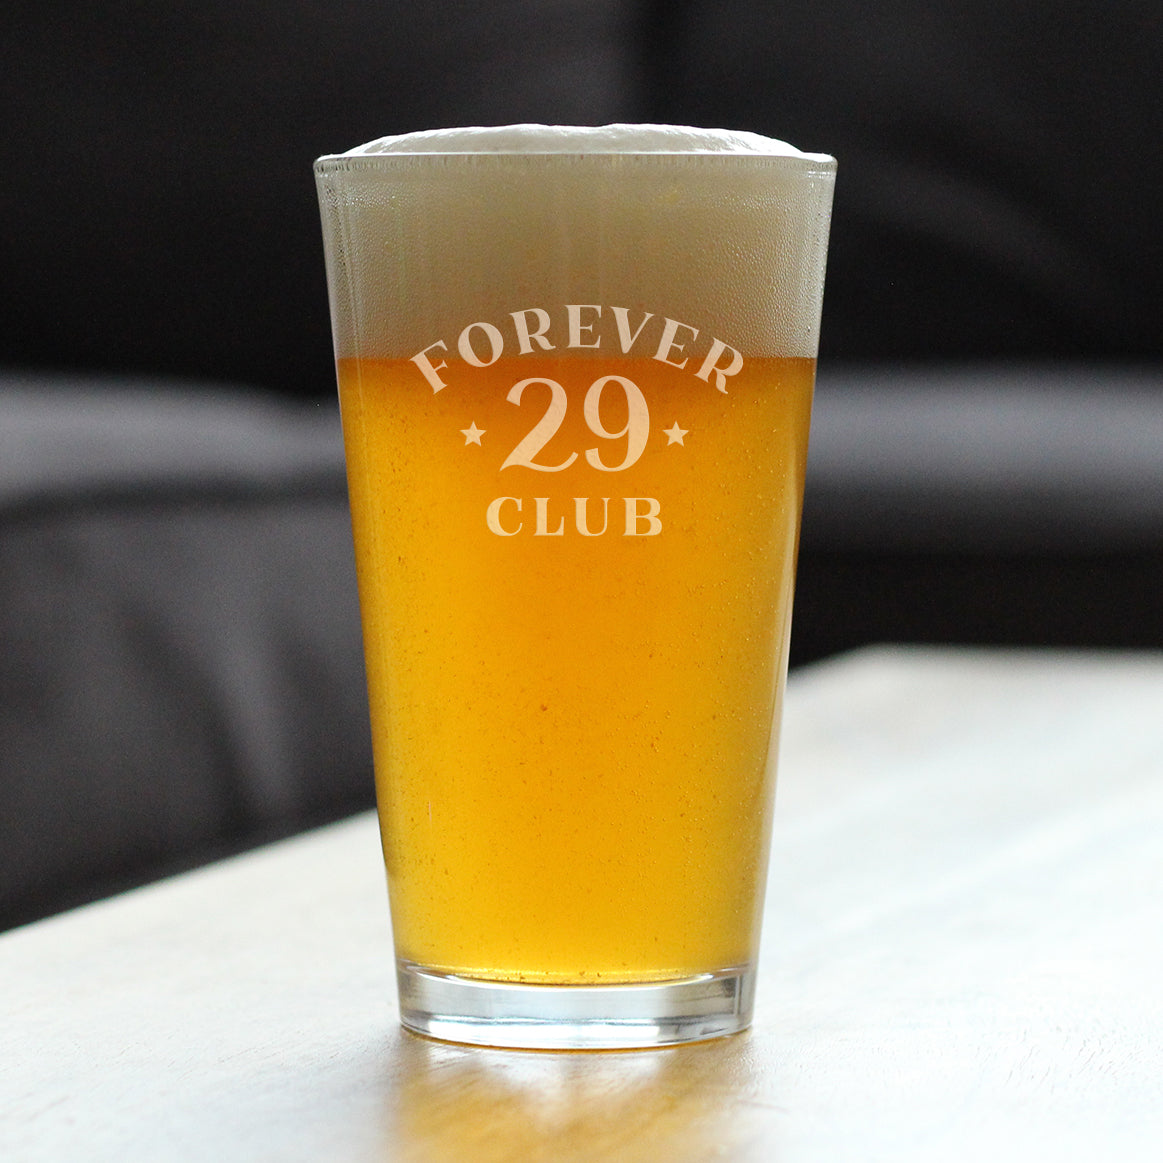 Forever 29 Club - Pint Glass for 30th Beer Birthday Gifts for Women &amp; Men Turning 30 - Fun Bday Party Decor - 16 Oz